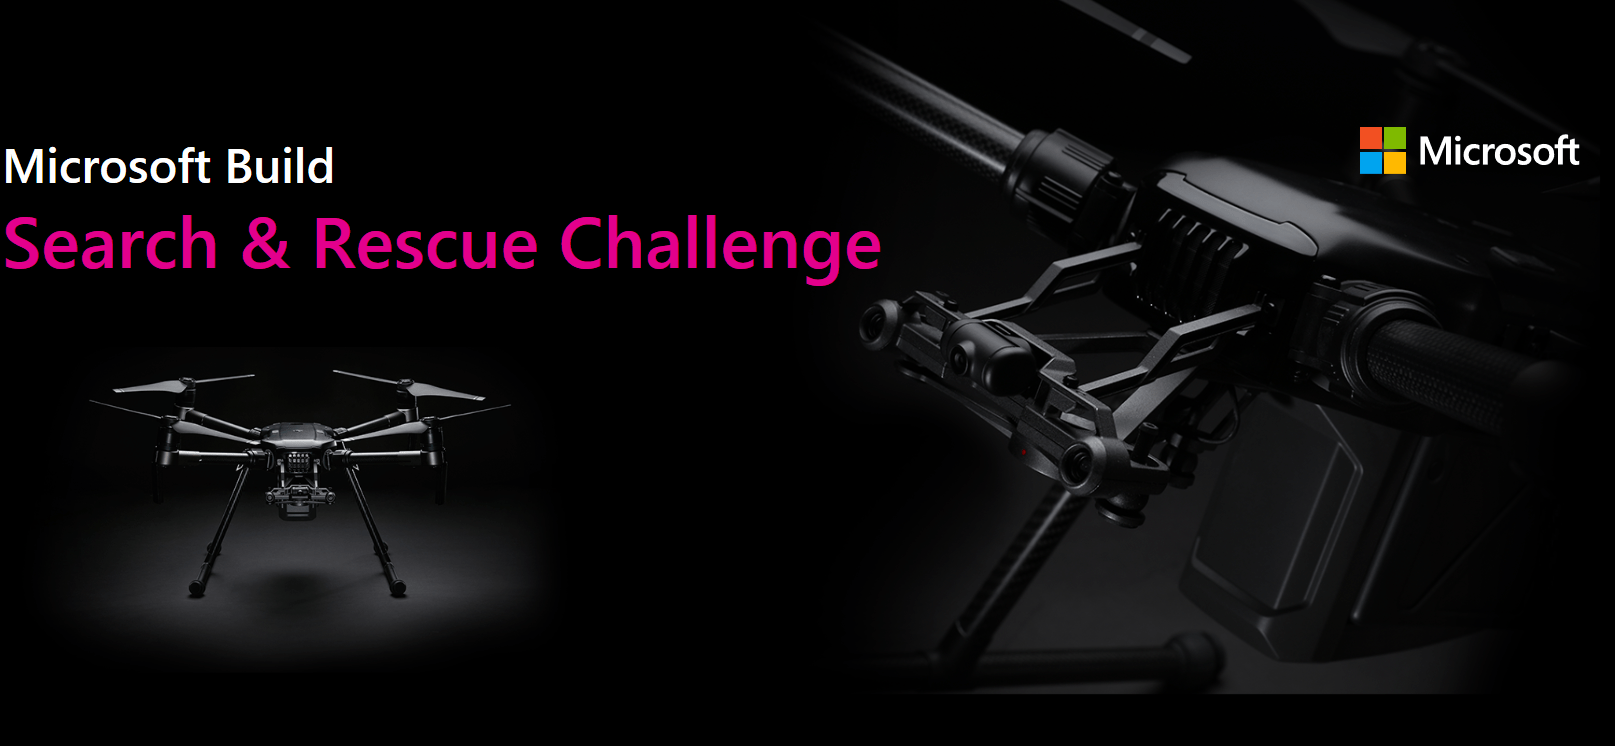 Microsoft issues Search and Rescue AI Challenge to devs attending Build 2018 - OnMSFT.com - April 9, 2018